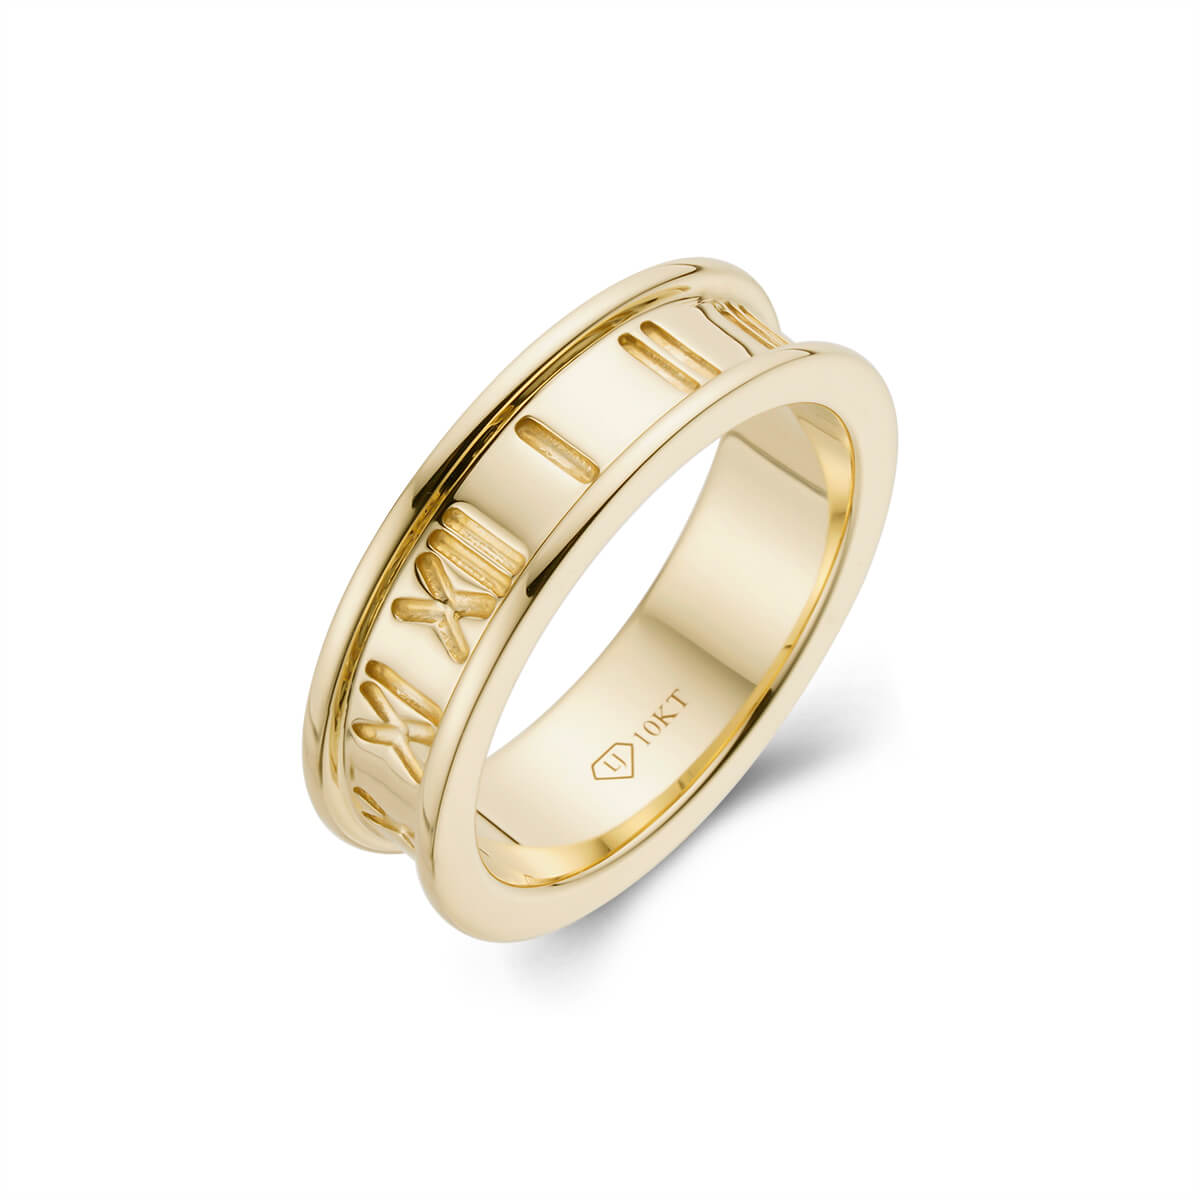 Roman Numeral Ring and Date Ring | Centime Gift